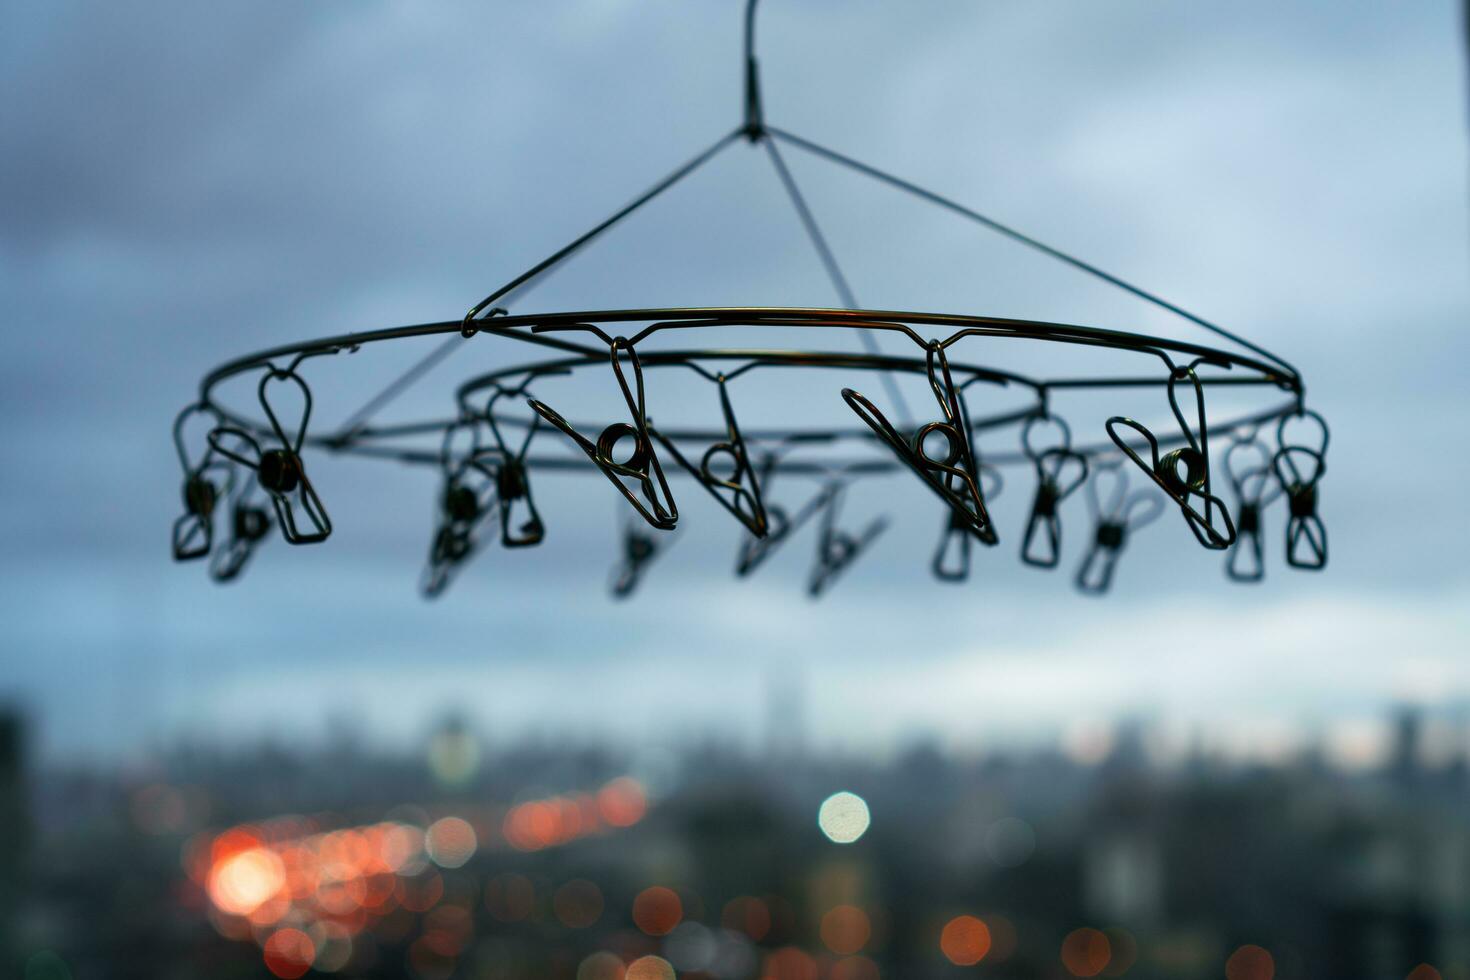 Close up of stainless steel hanging clothespins with blurred background of city in rainy day photo